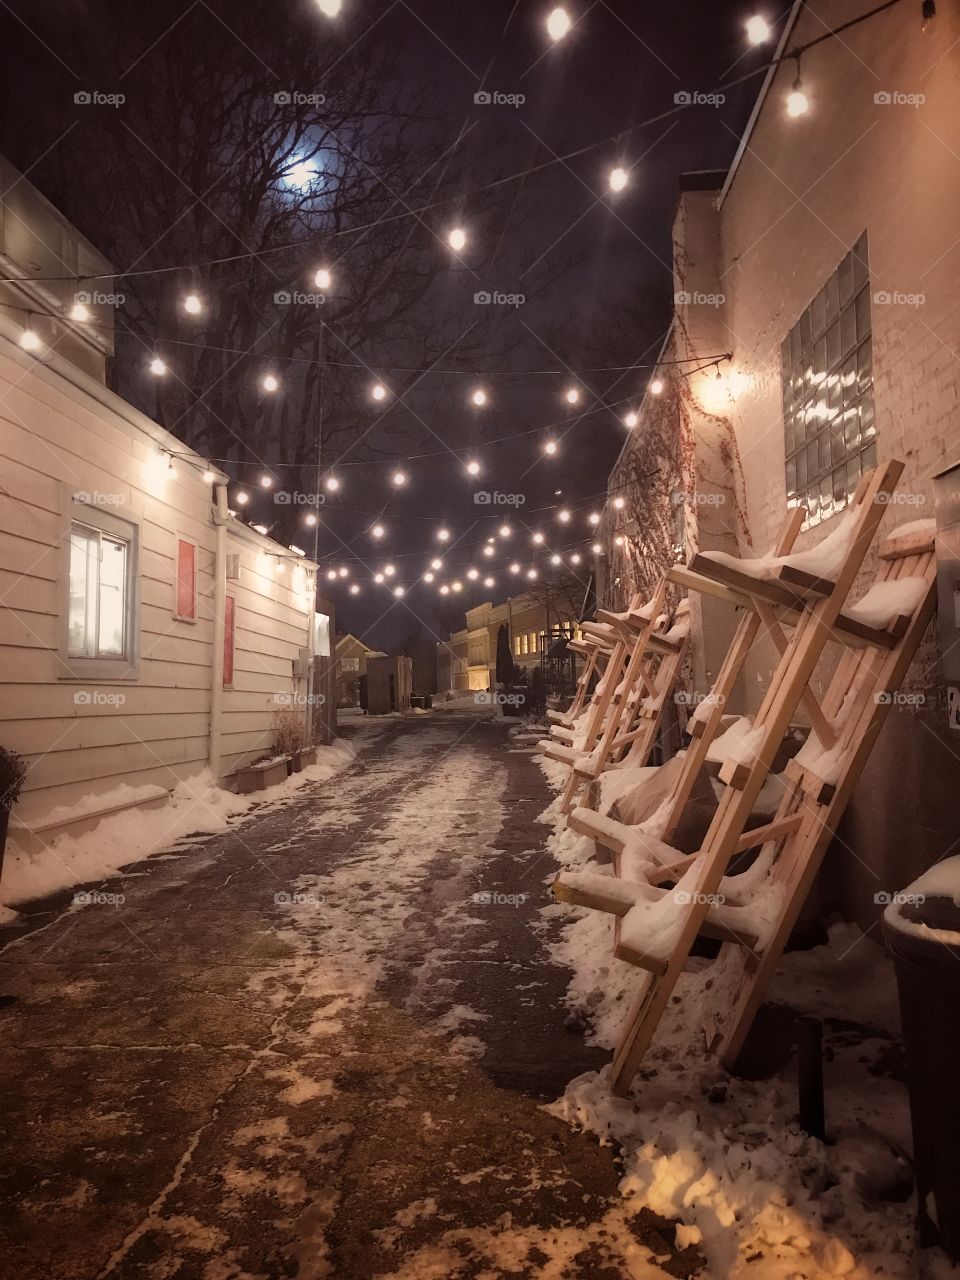 A snowy alley in a small town, bistro lights pair with a glowing moon through the haze of a winter evening in small town America. A line of picnic tables, stacked along the wall since it’s not longer the season for outdoor eating, are draped in snow.